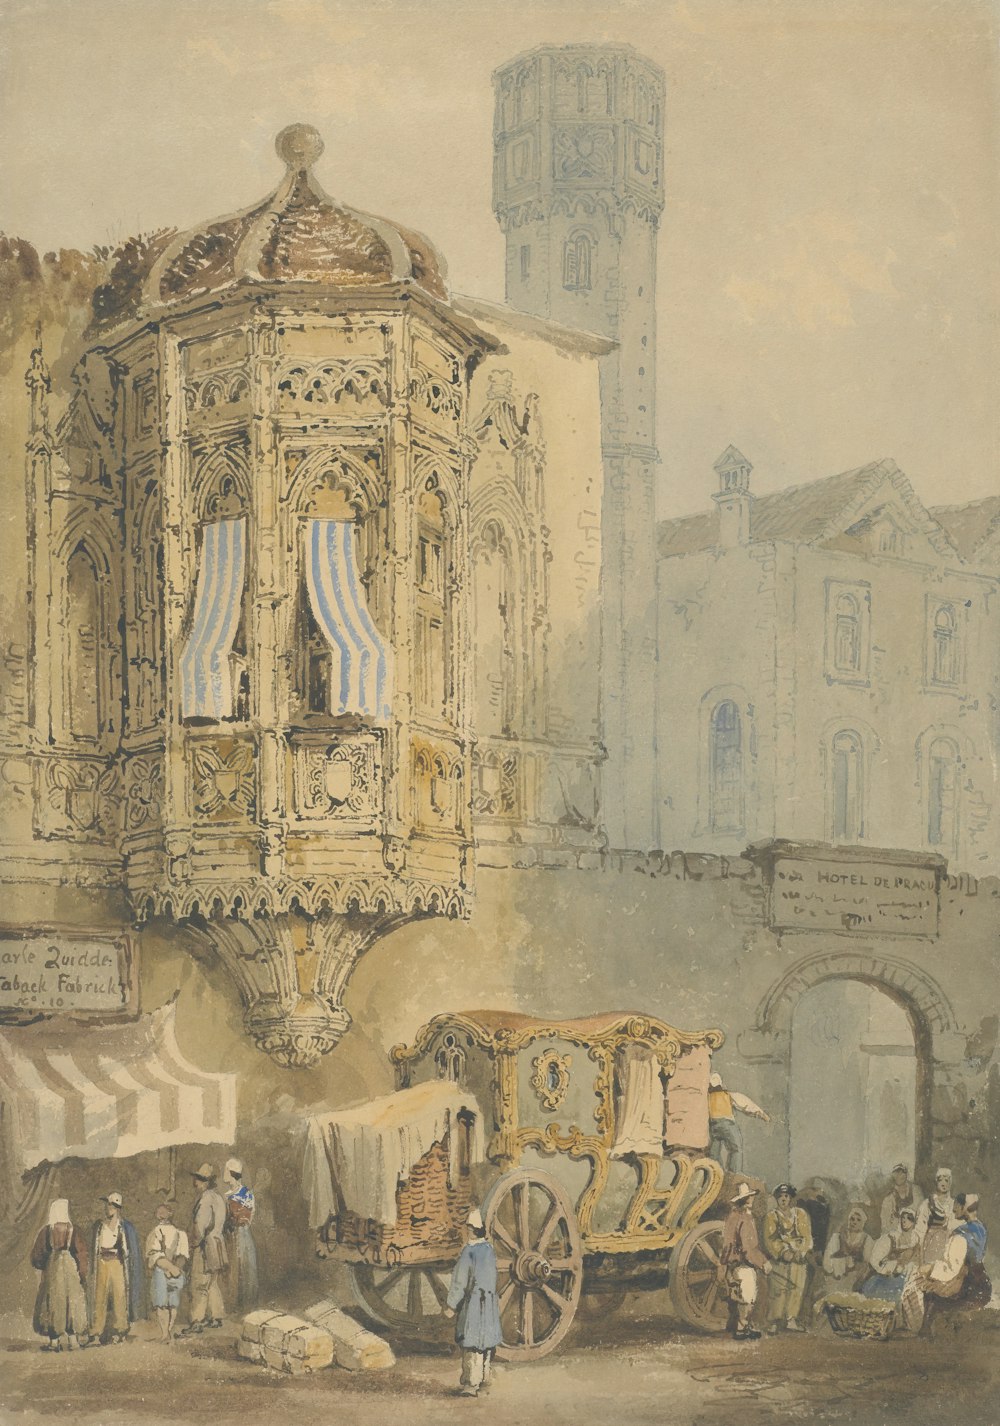 a painting of a horse drawn carriage in front of a building